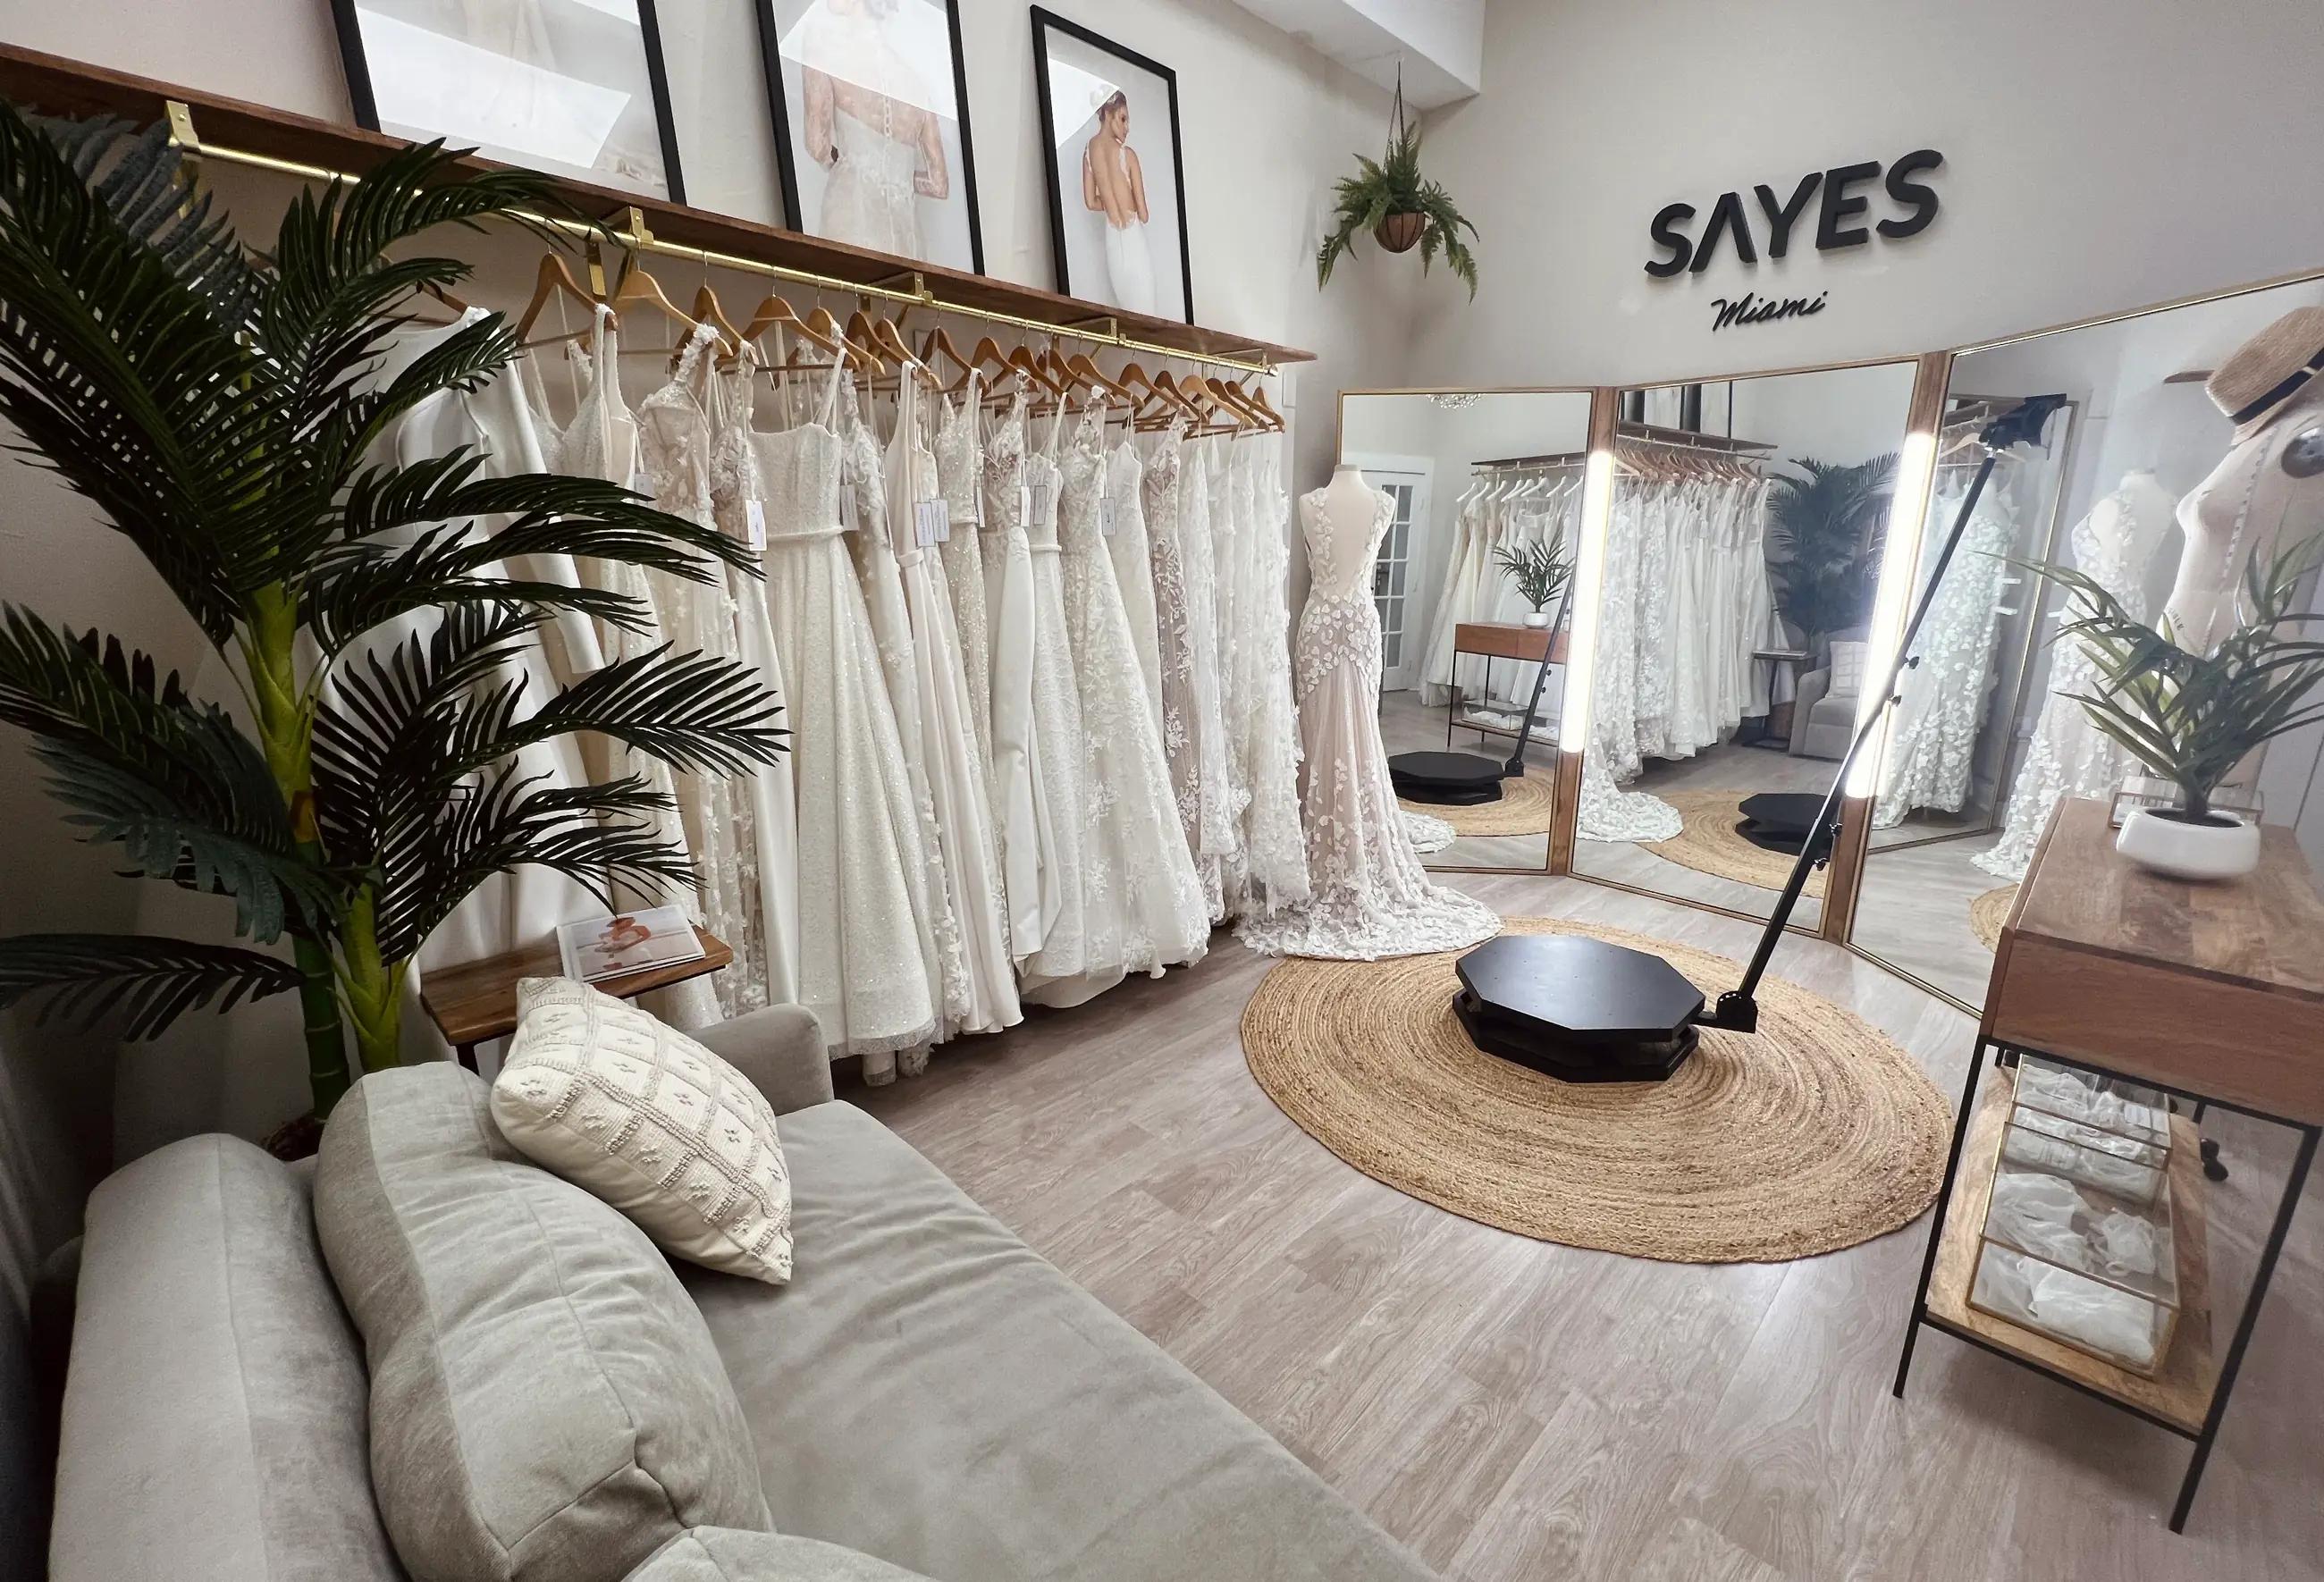 Welcome to SAYES Miami Image